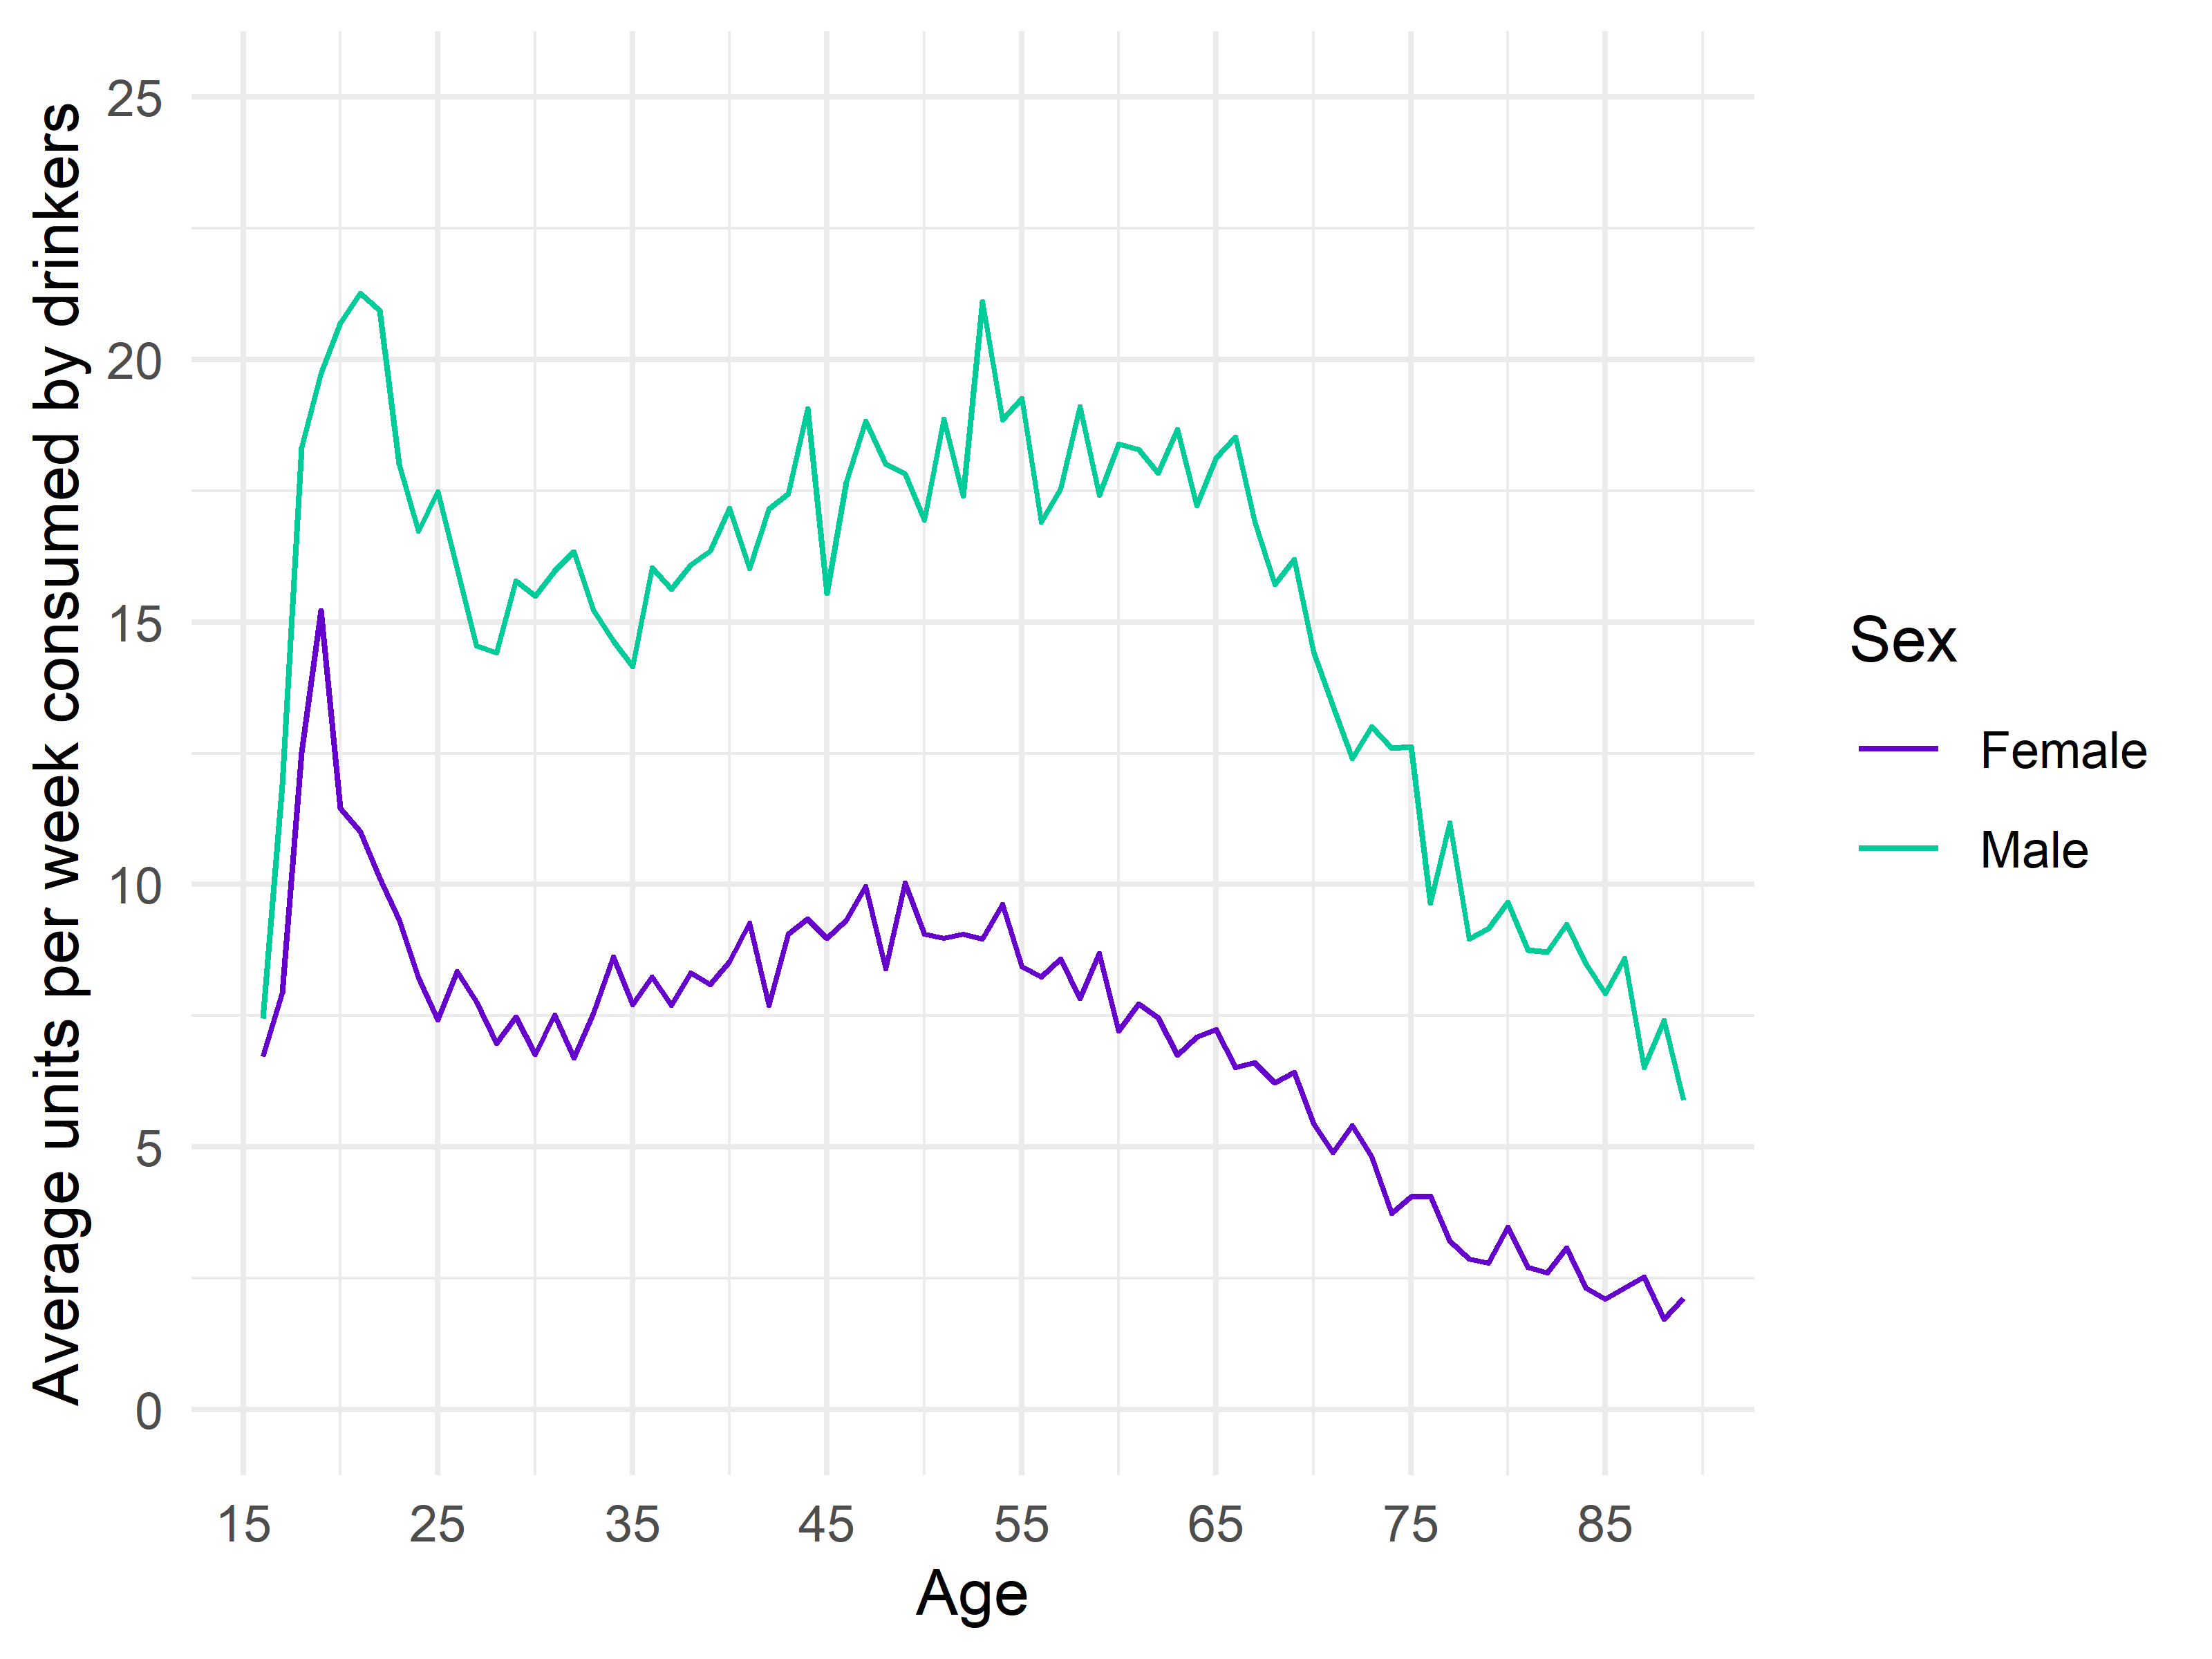 Figure 15. Sex specific age trends in the average amount drunk per week by people who drink alcohol.